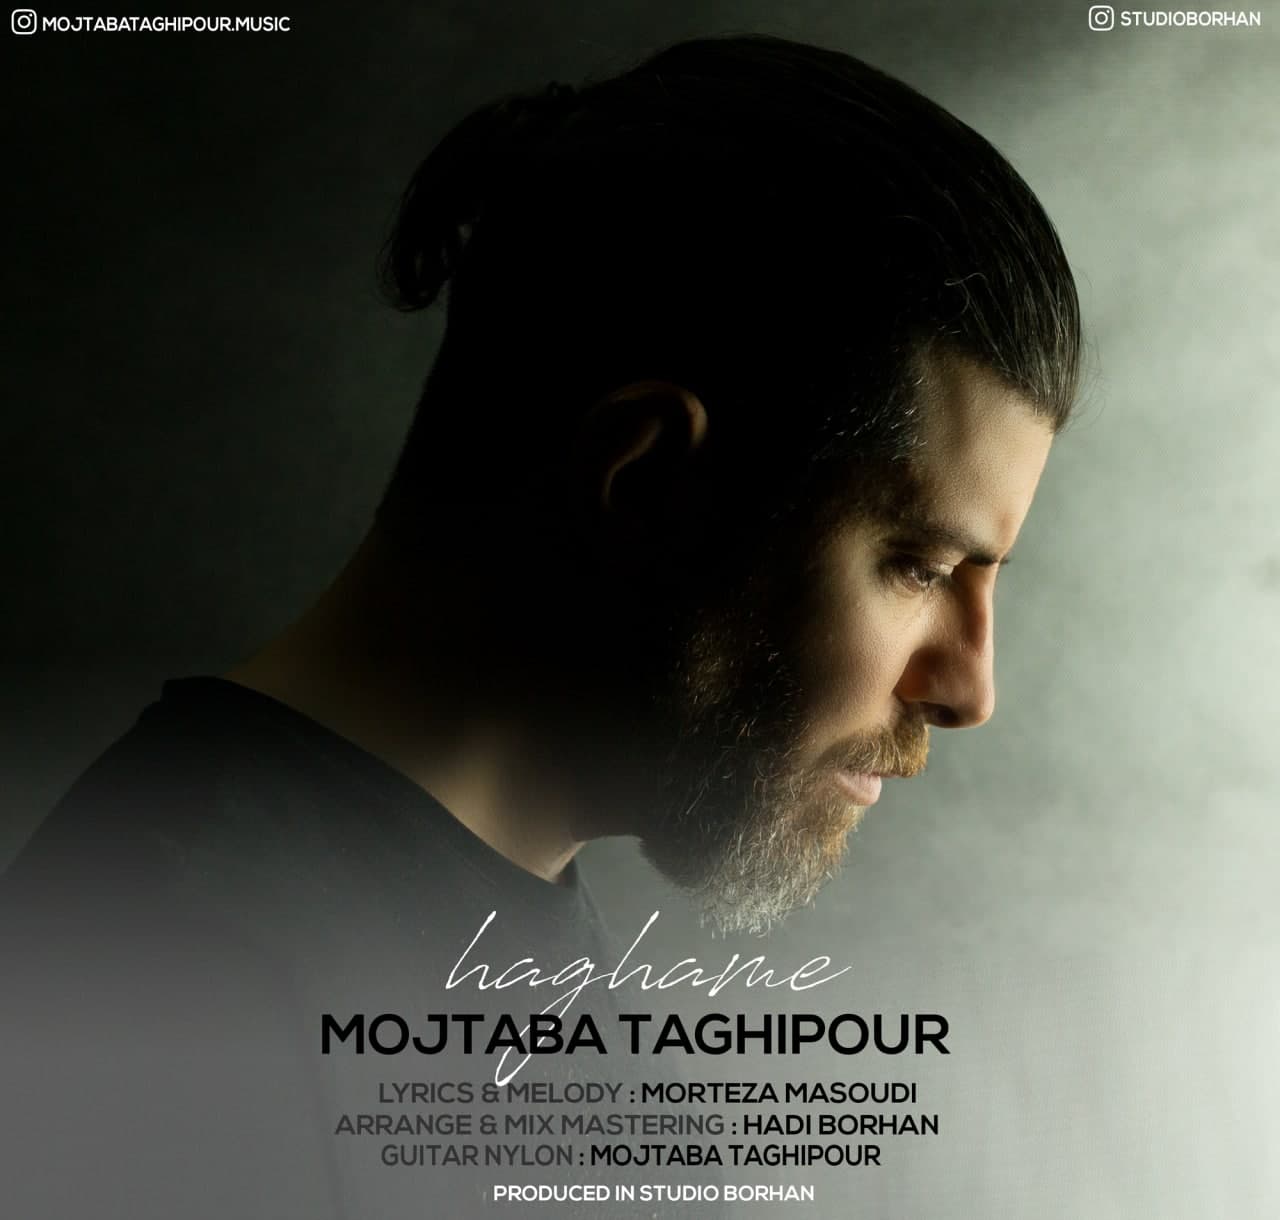 Mojtaba Taghipour – Haghame